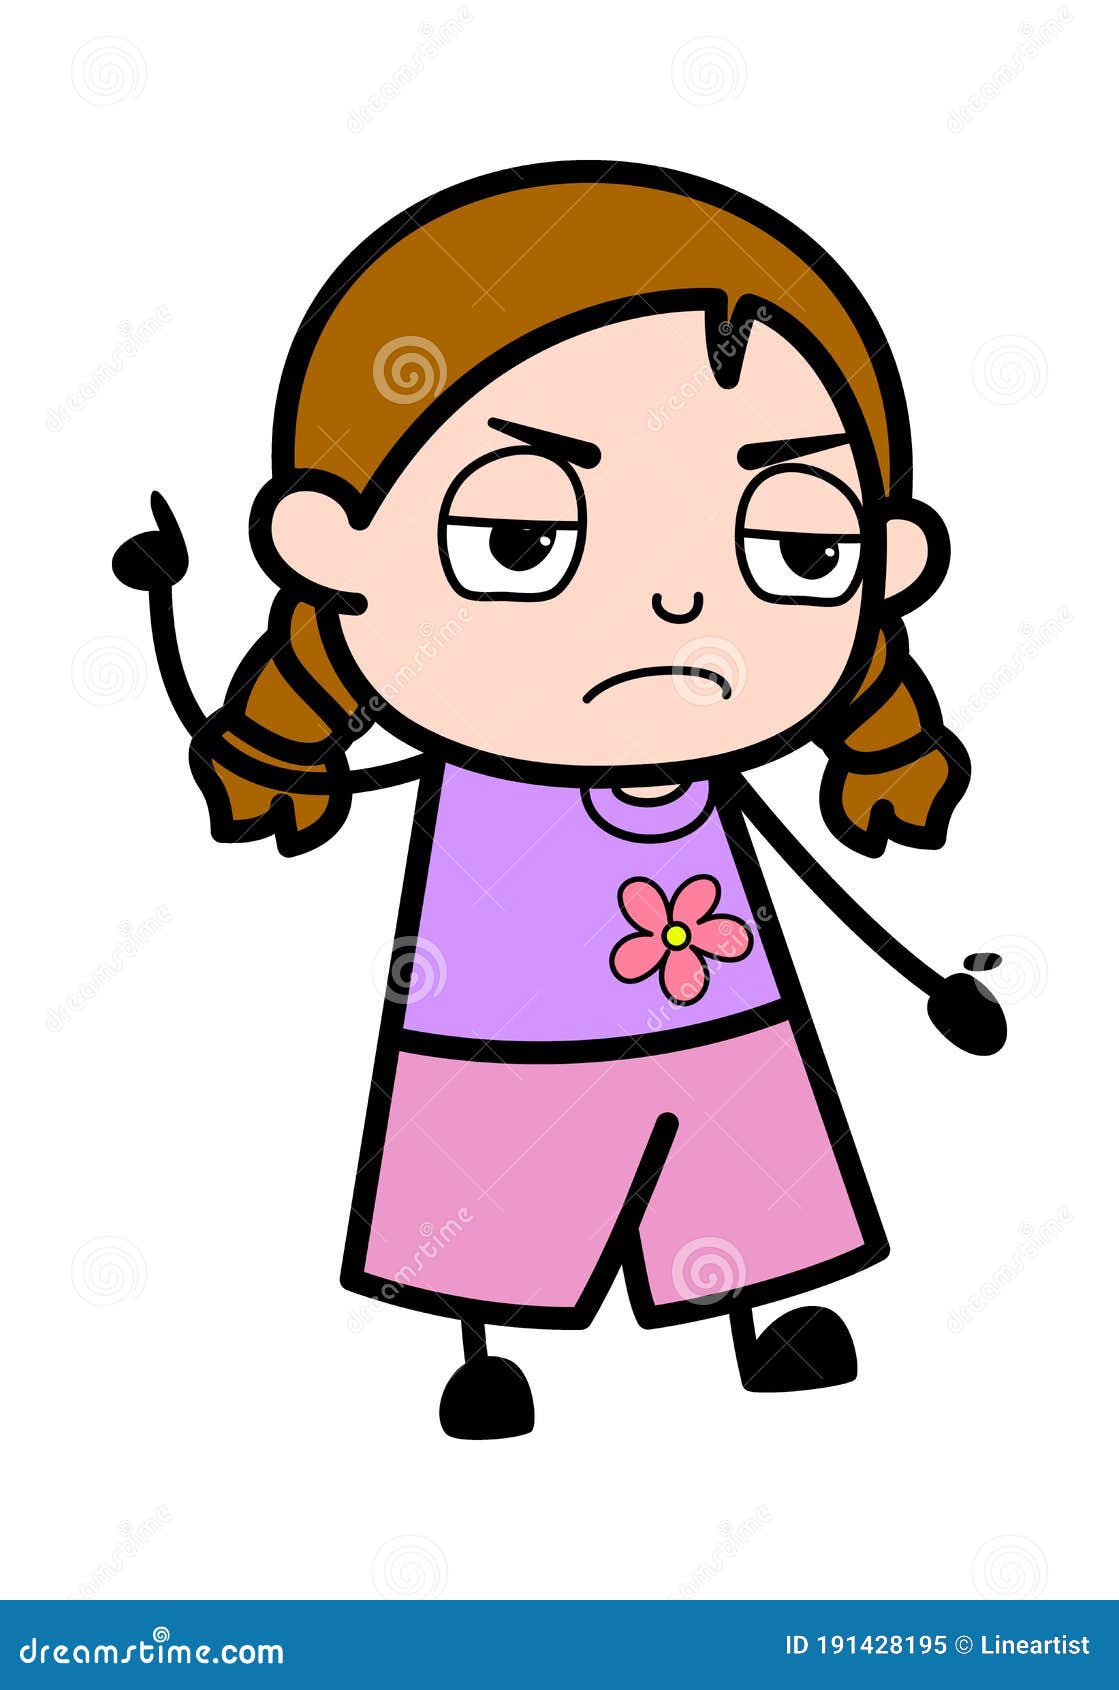 Angry Girl Cartoon with One Hand Raised Stock Illustration - Illustration  of character, scoldering: 191428195